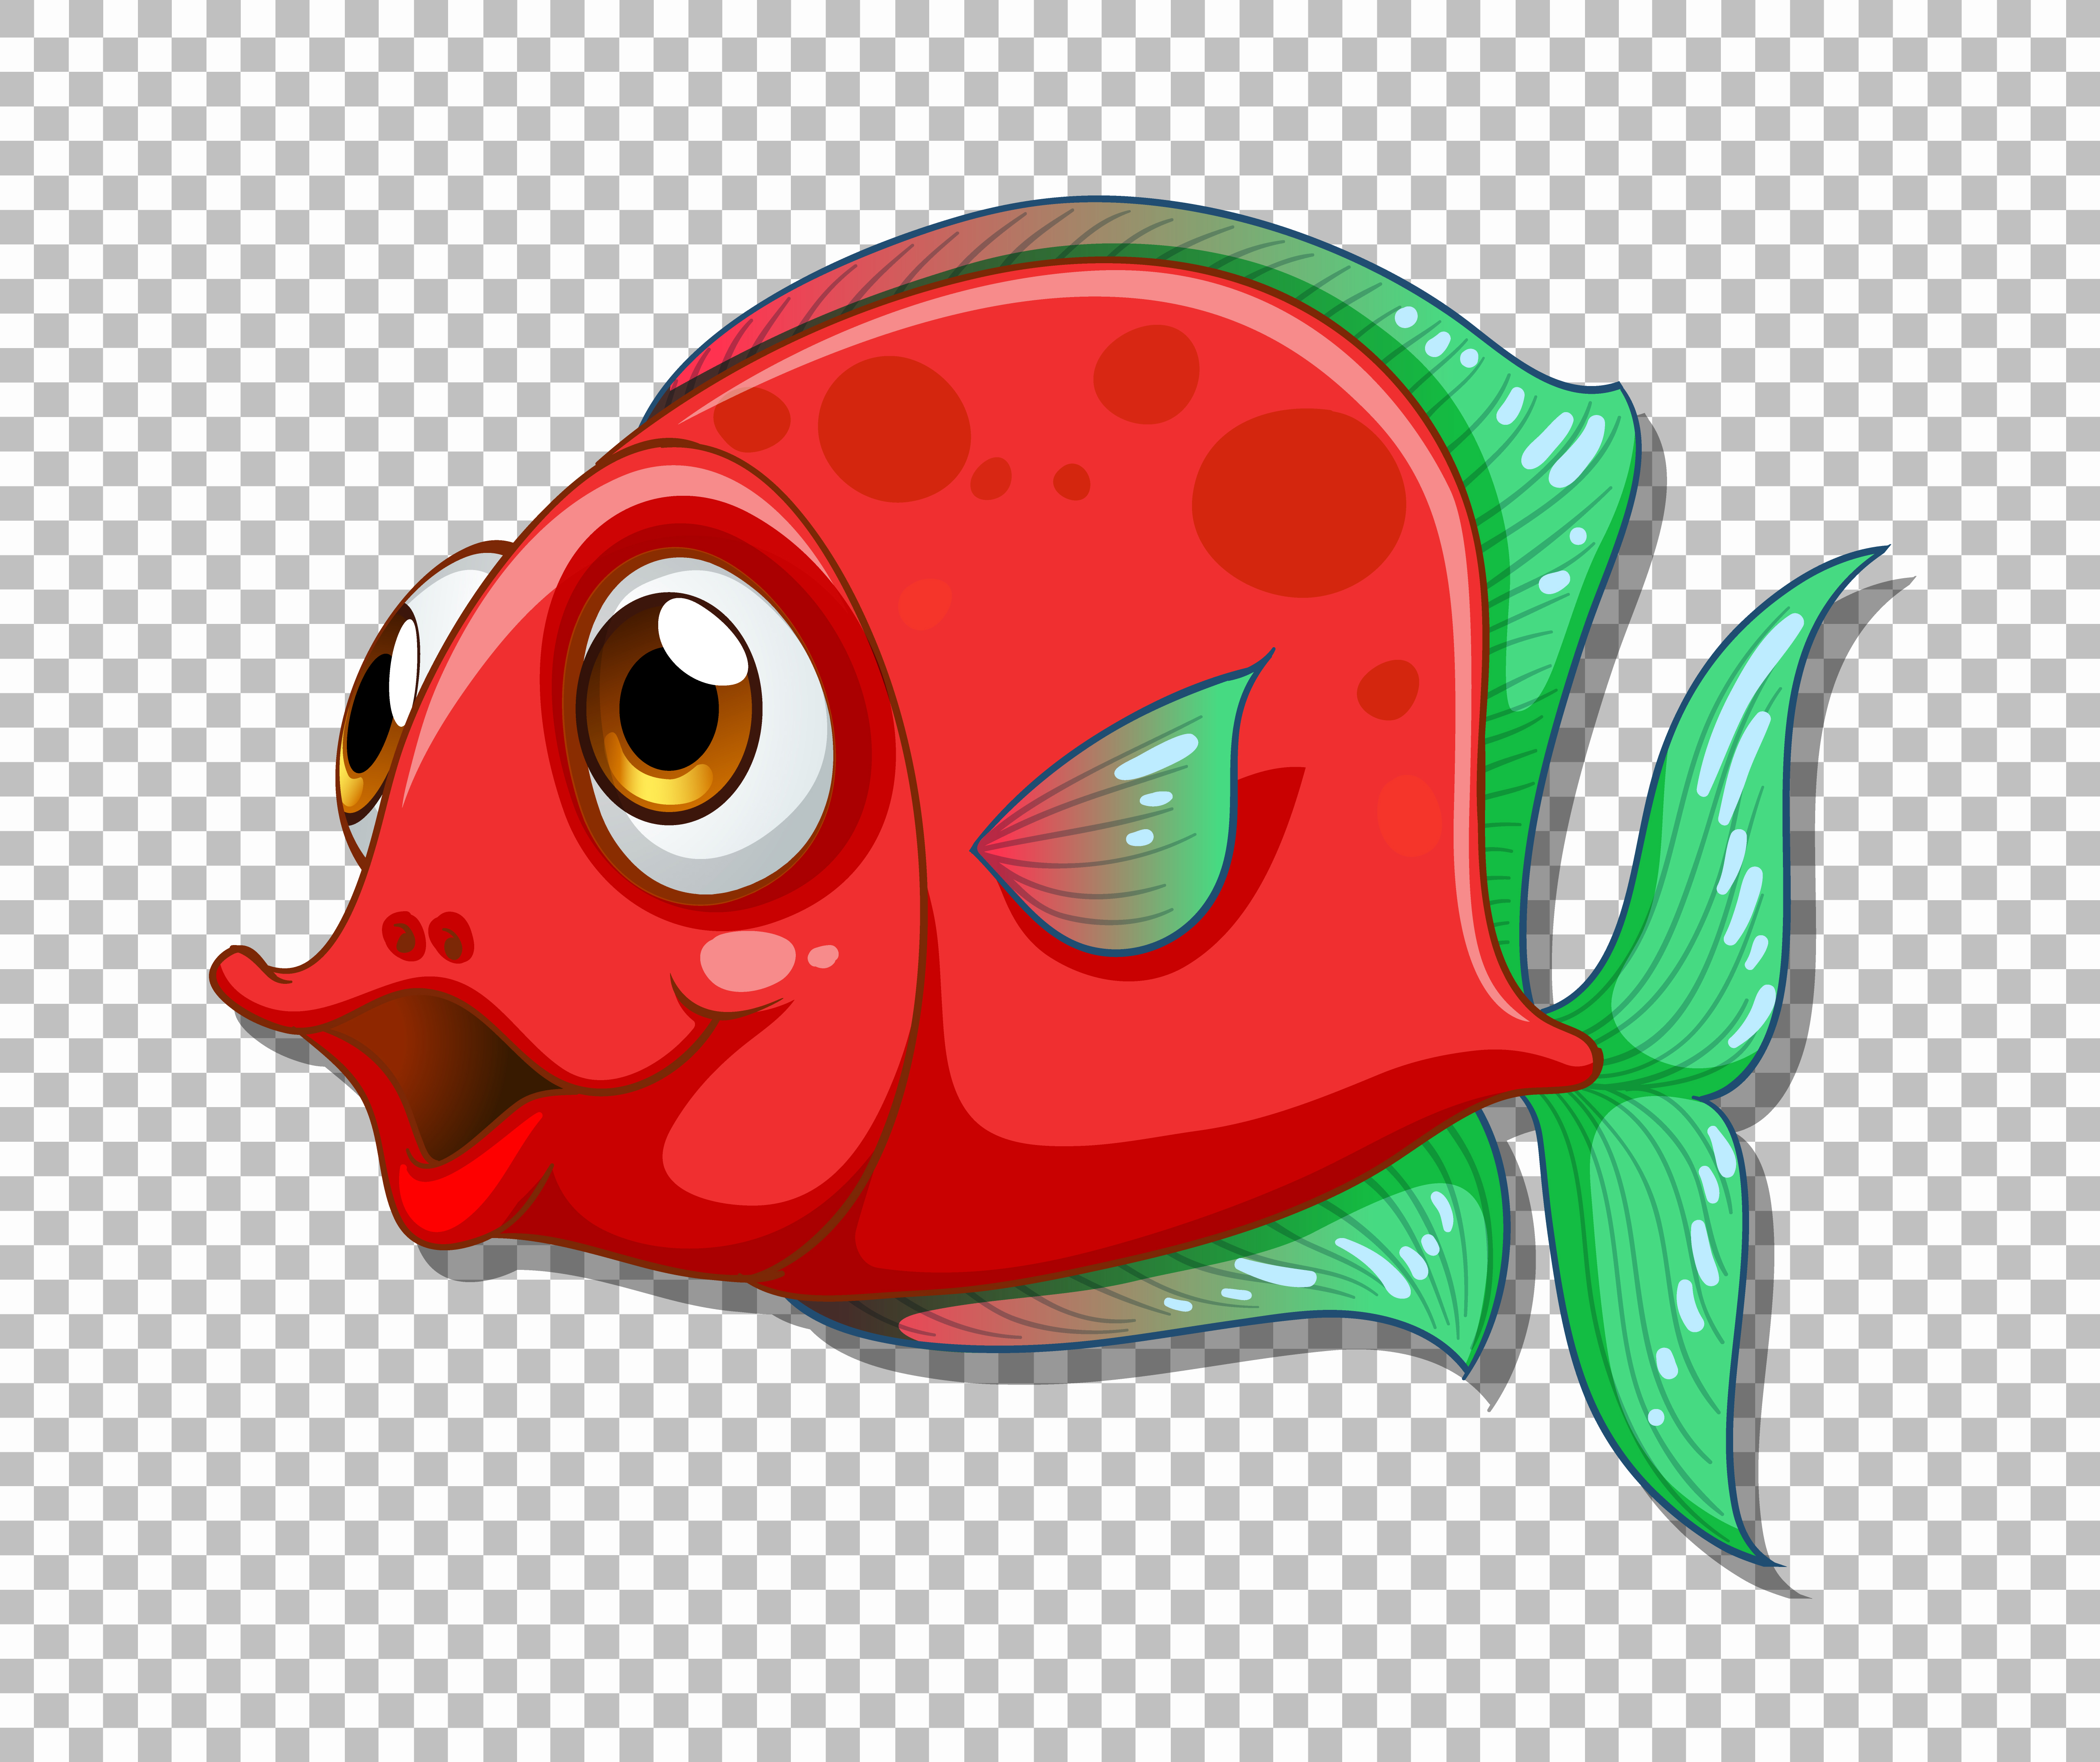 Red exotic fish cartoon character on transparent background